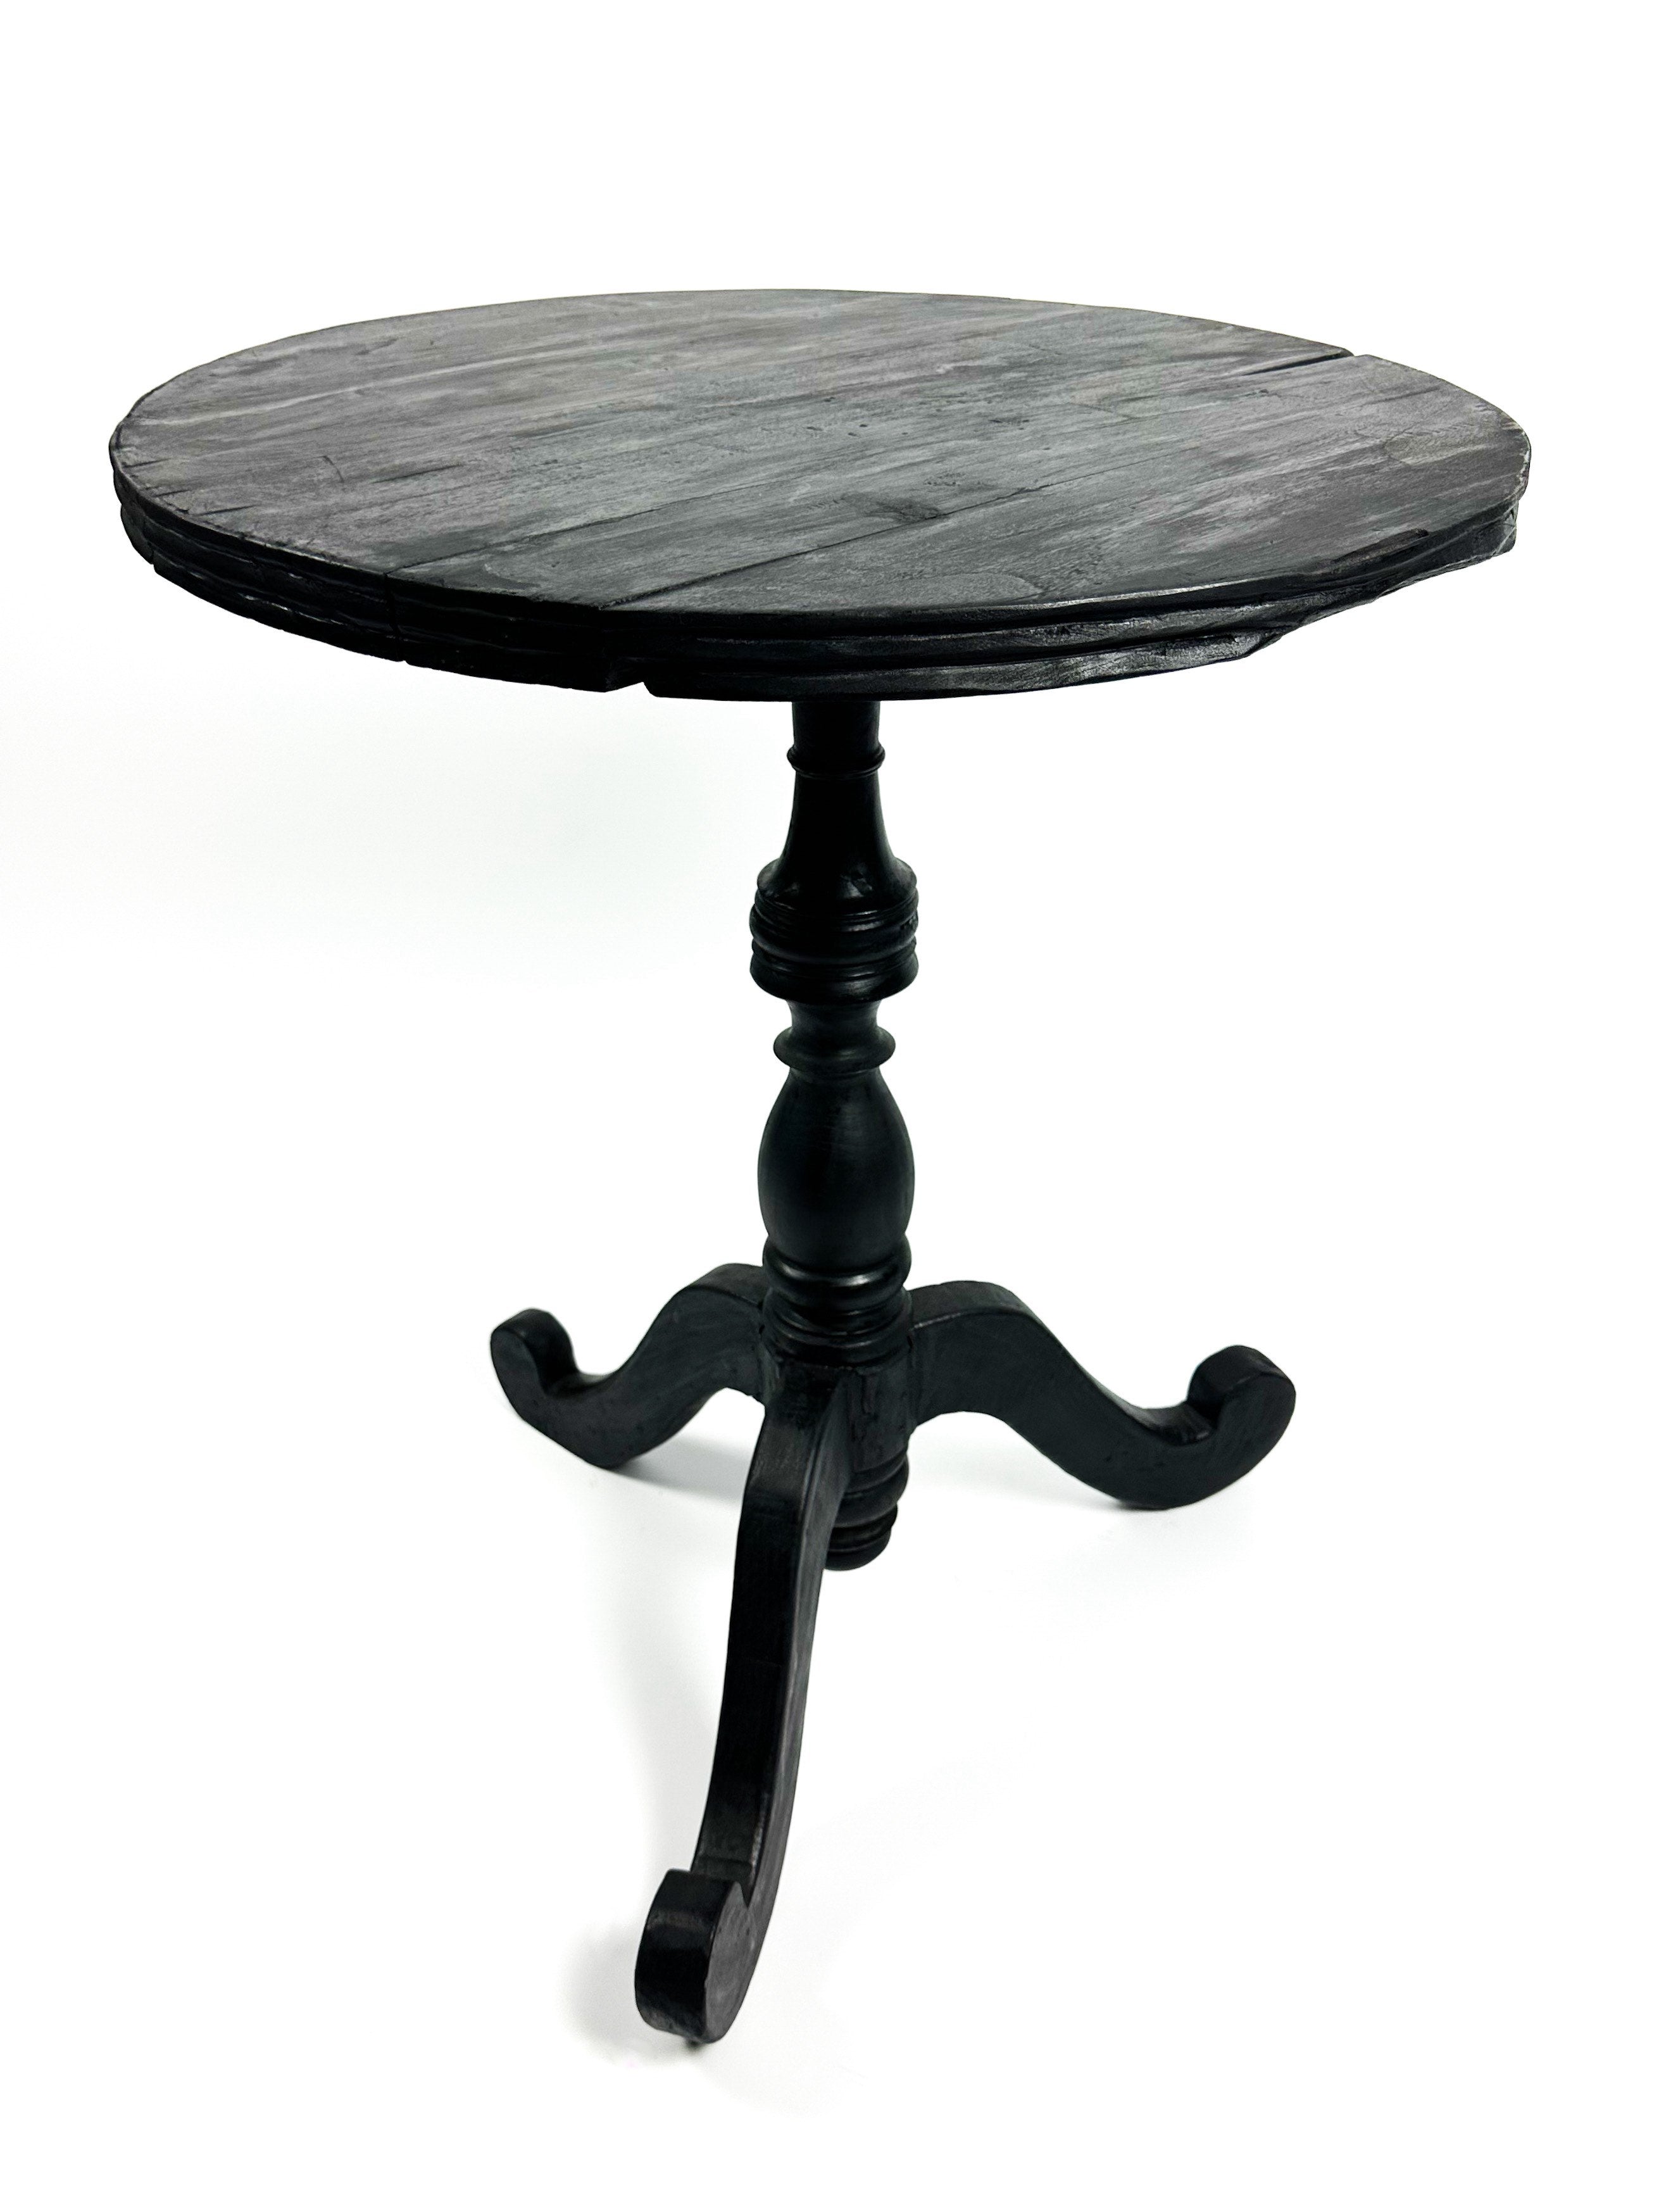 The black colonial table